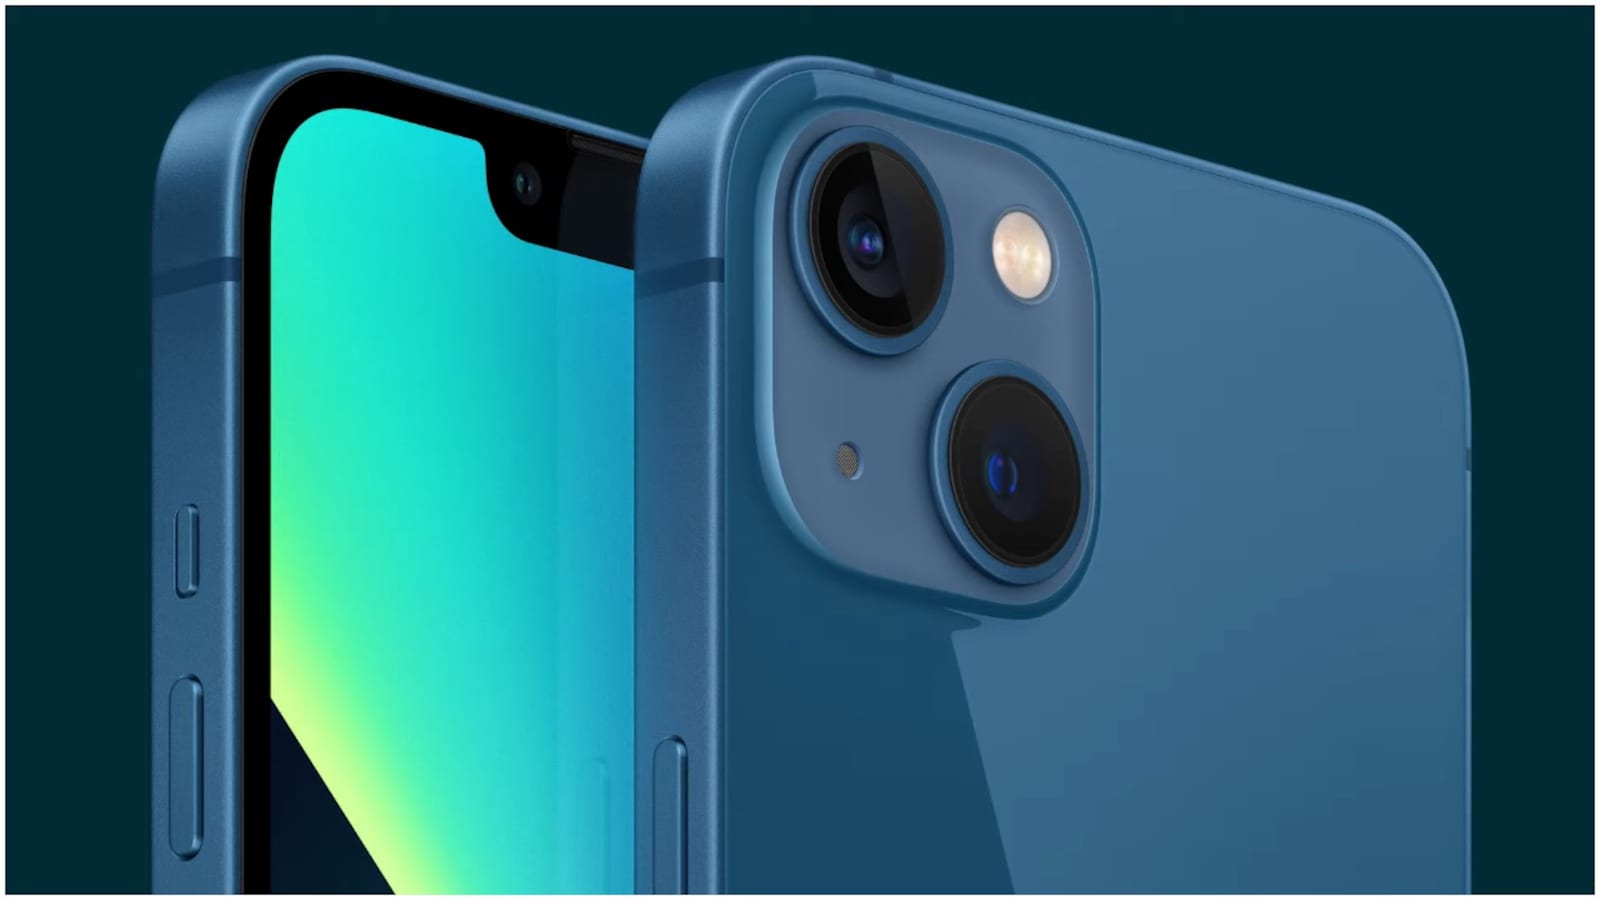 This luxury iPhone 13 pro max costs above Rs 30 lakh